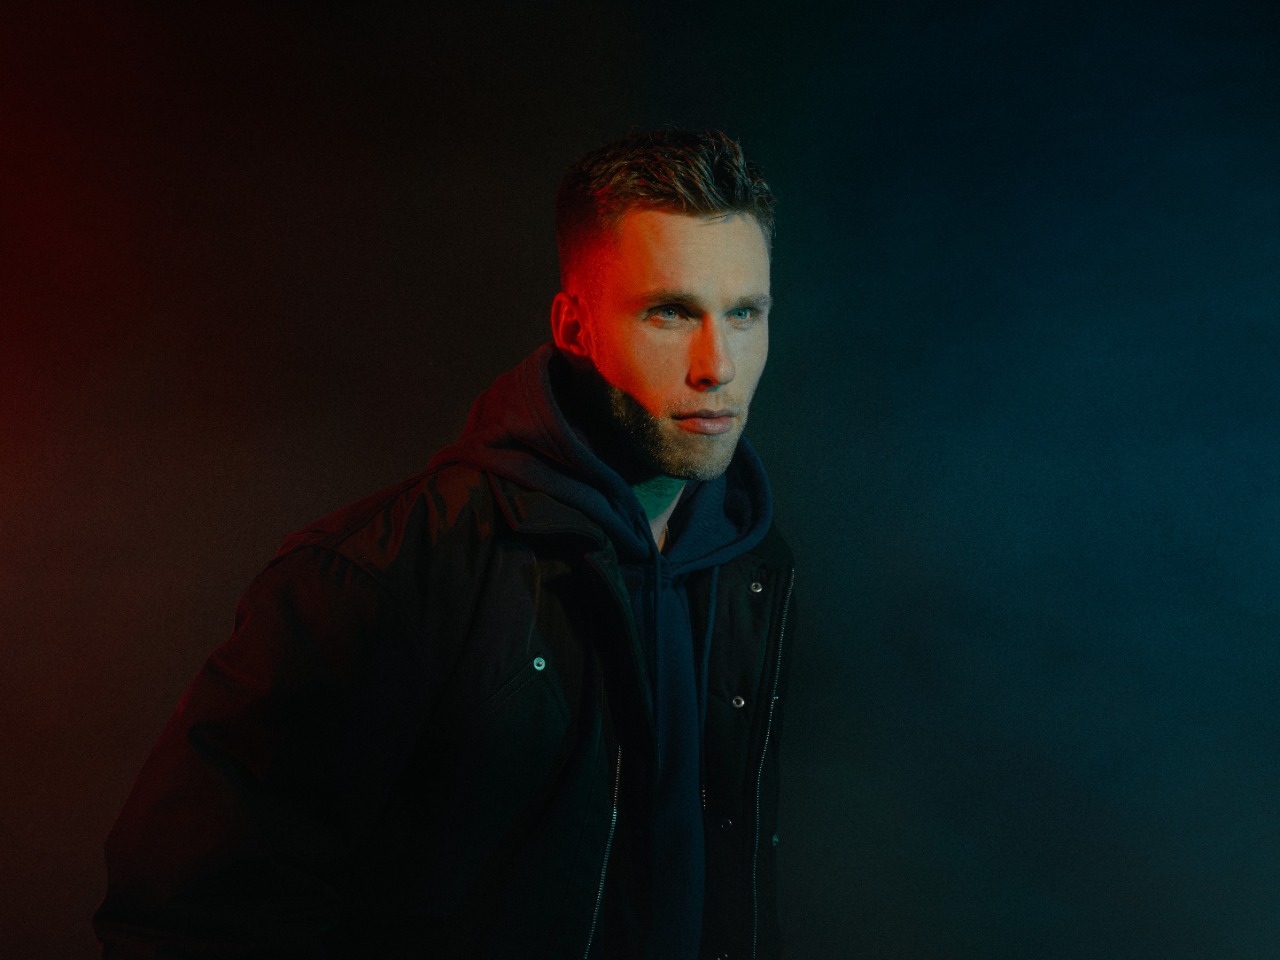 Nicky Romero Drops Addictive New Monocule Single “Only For The Night”